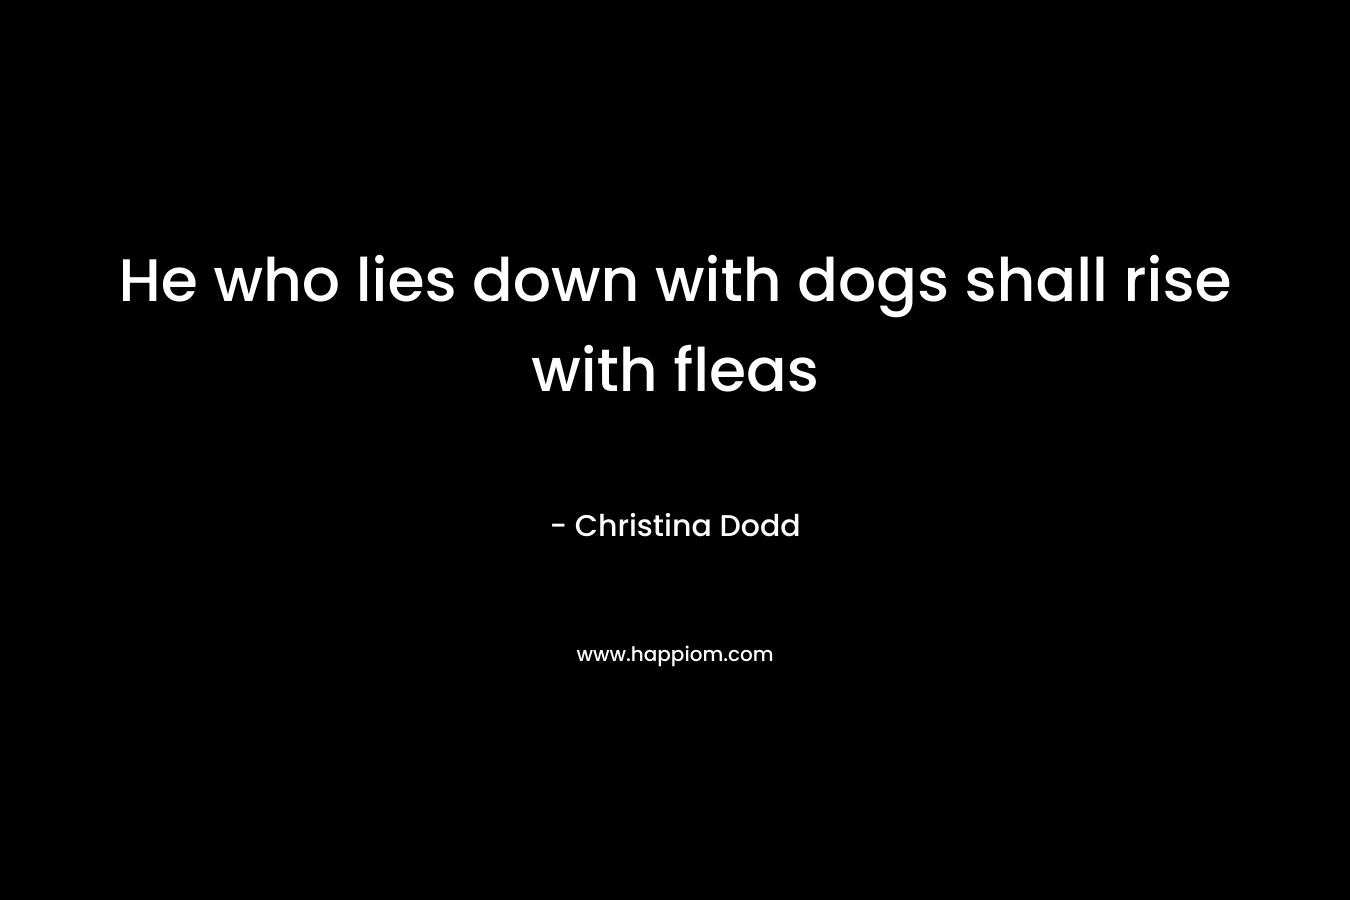 He who lies down with dogs shall rise with fleas